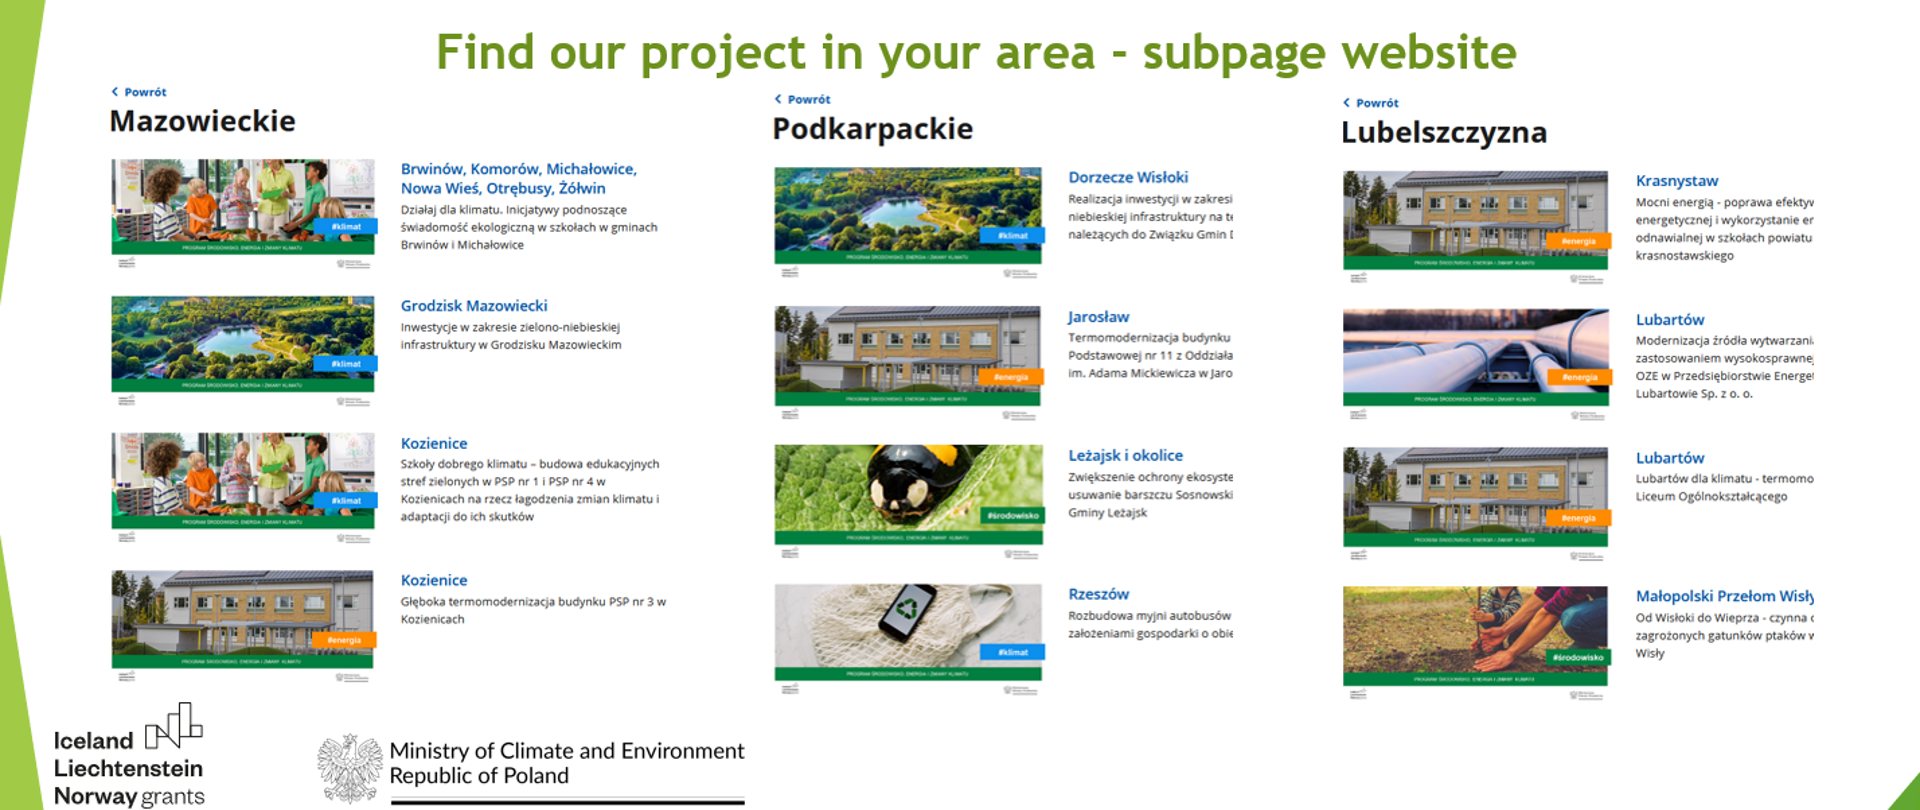 Find our project in your area – new website